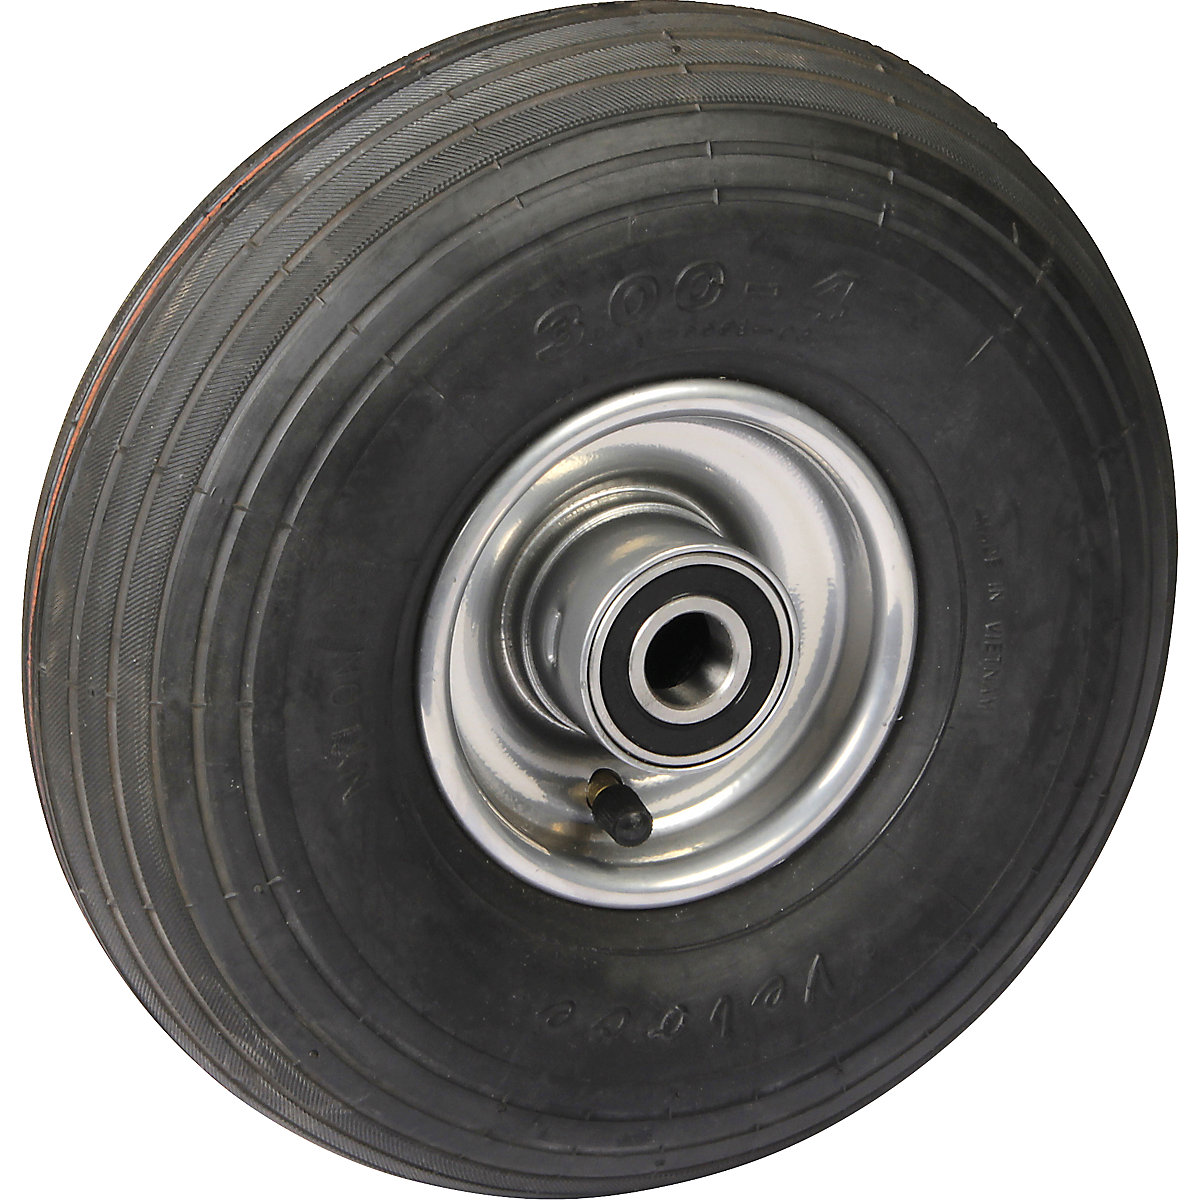 Pneumatic tyre, wheel with 1-part sheet steel rim, wheel Ø x width 260 x 85 mm, ribbed tread profile, with ball bearings-4